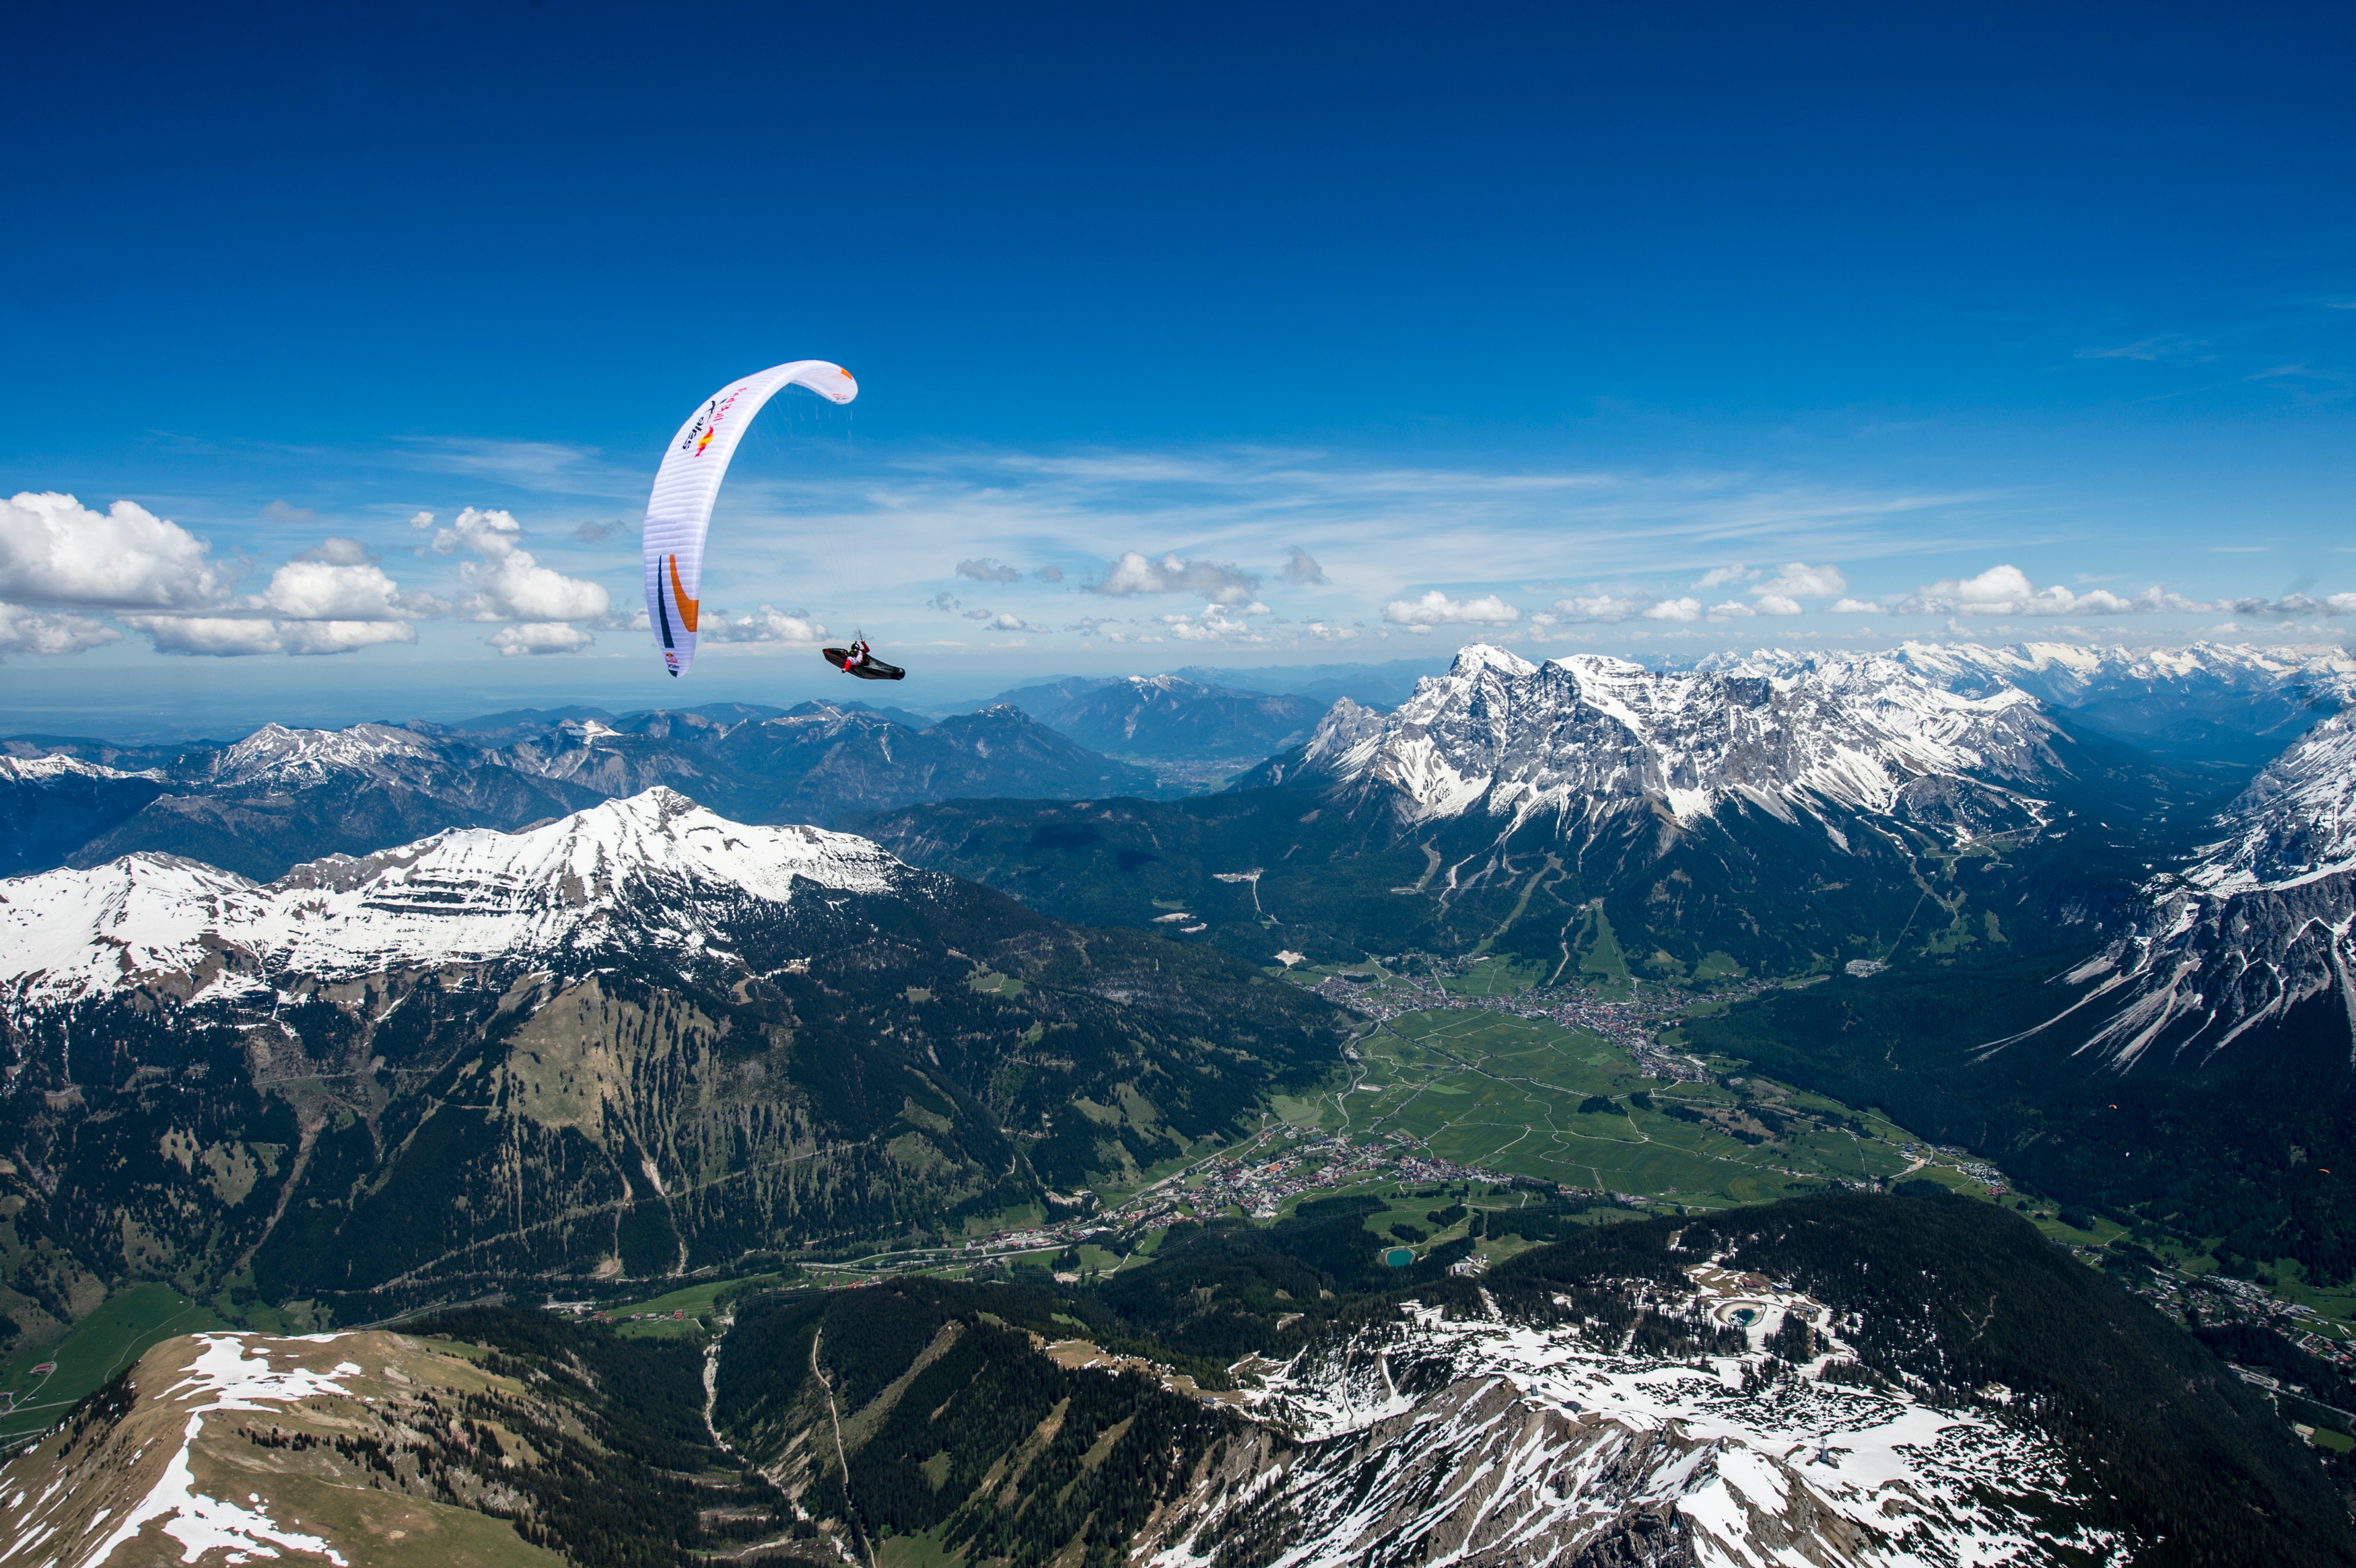 Participant flies during the Red Bull X-Alps preparations in Lermoos, Austria on june 02, 2019